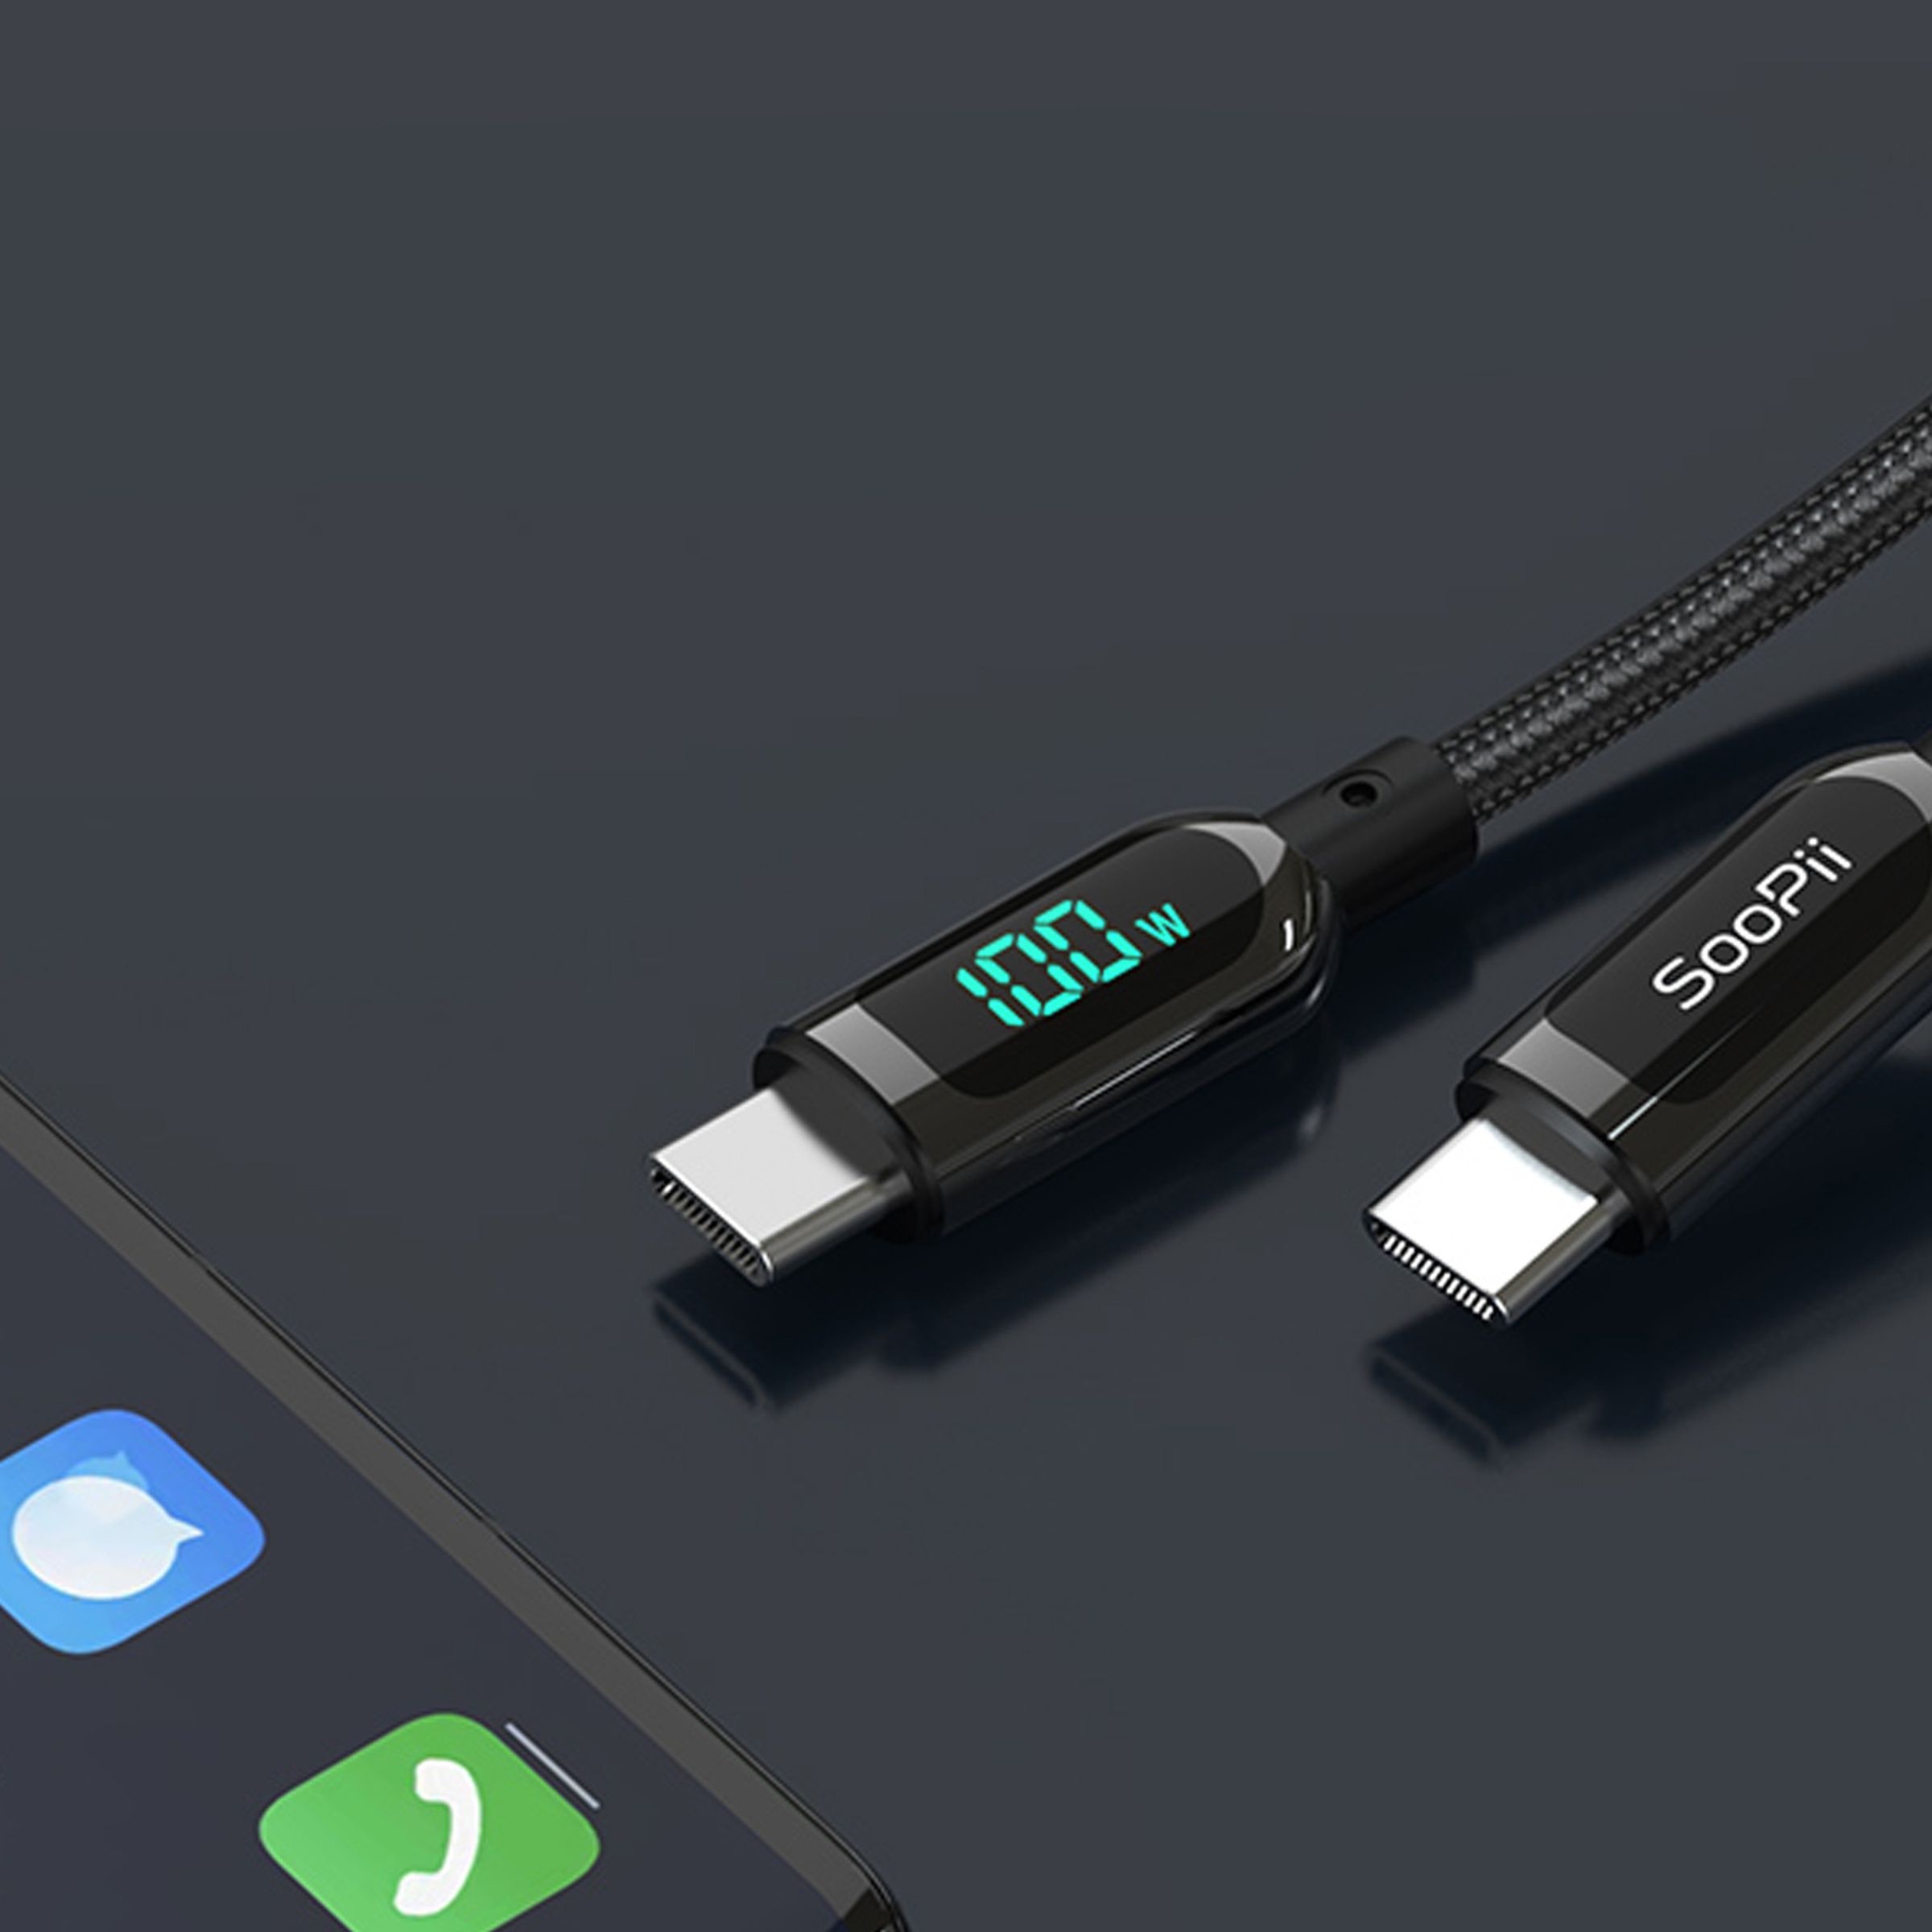 A USB-C to USB-C cable with a LED power meter built into one of its ends, about to be plugged into a phone.